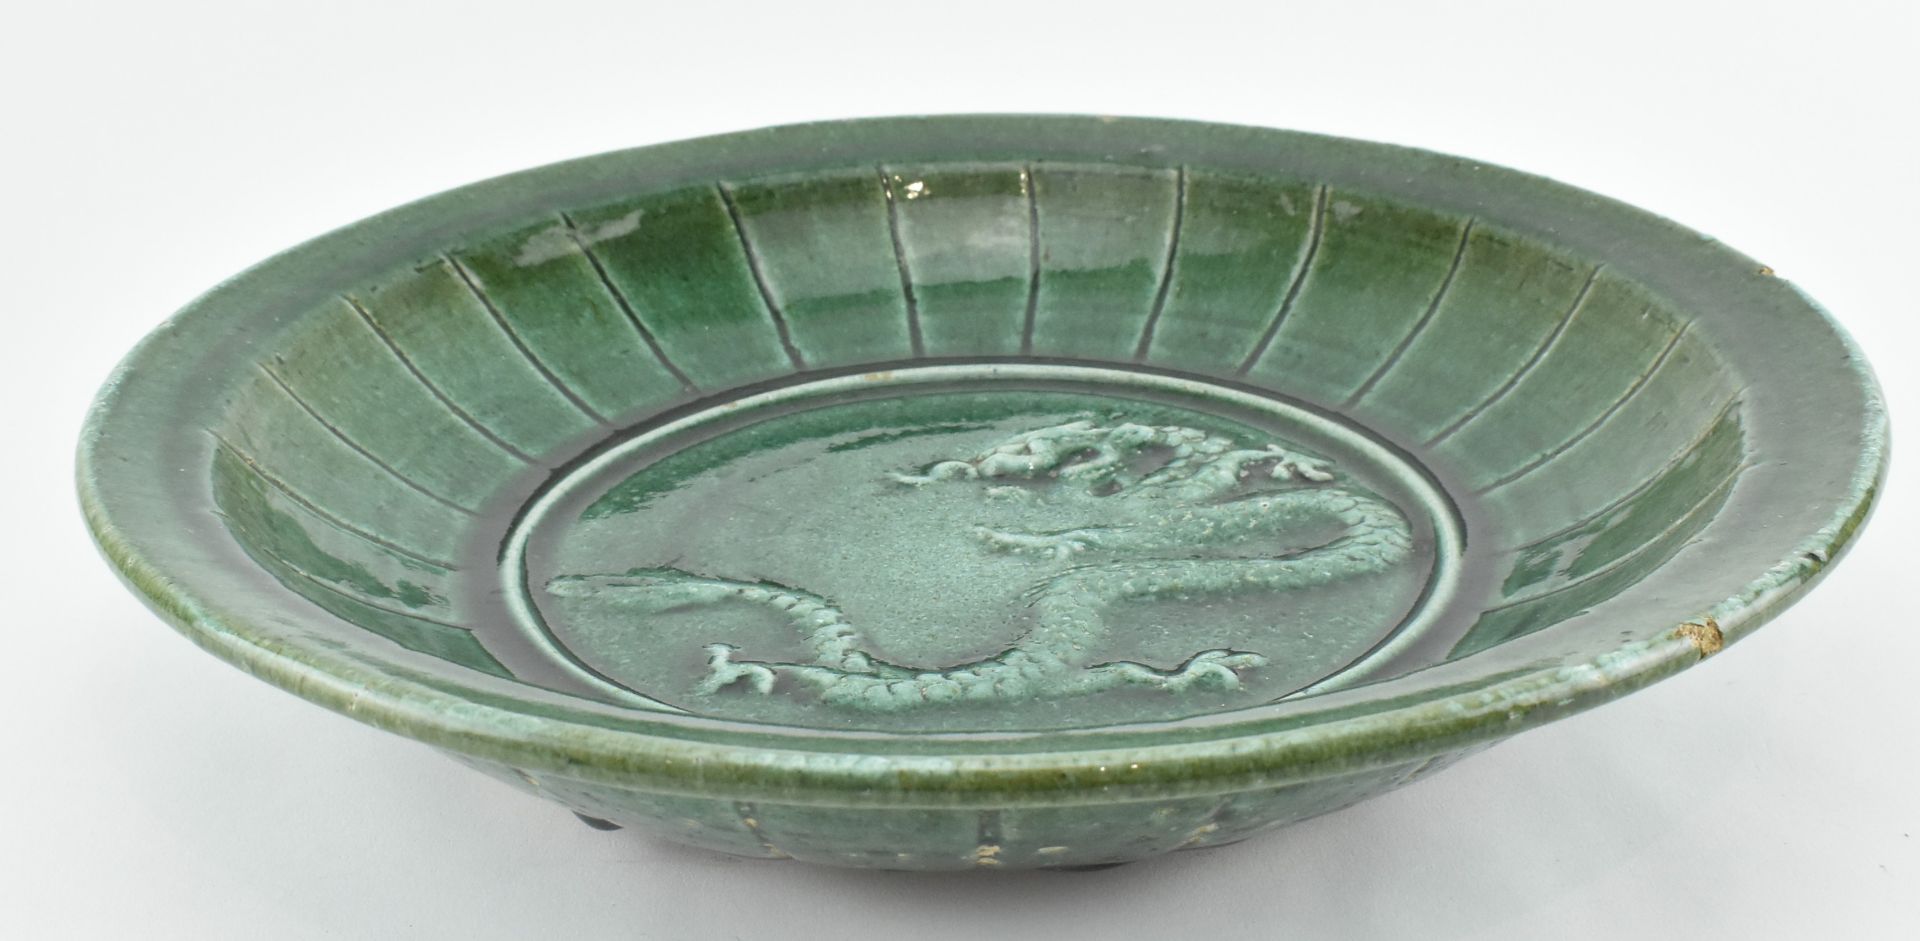 STONEWARE GREEN GLAZED "DRAGON" RELIEF CHARGER 绿釉三爪龙浮雕盘 - Image 4 of 6